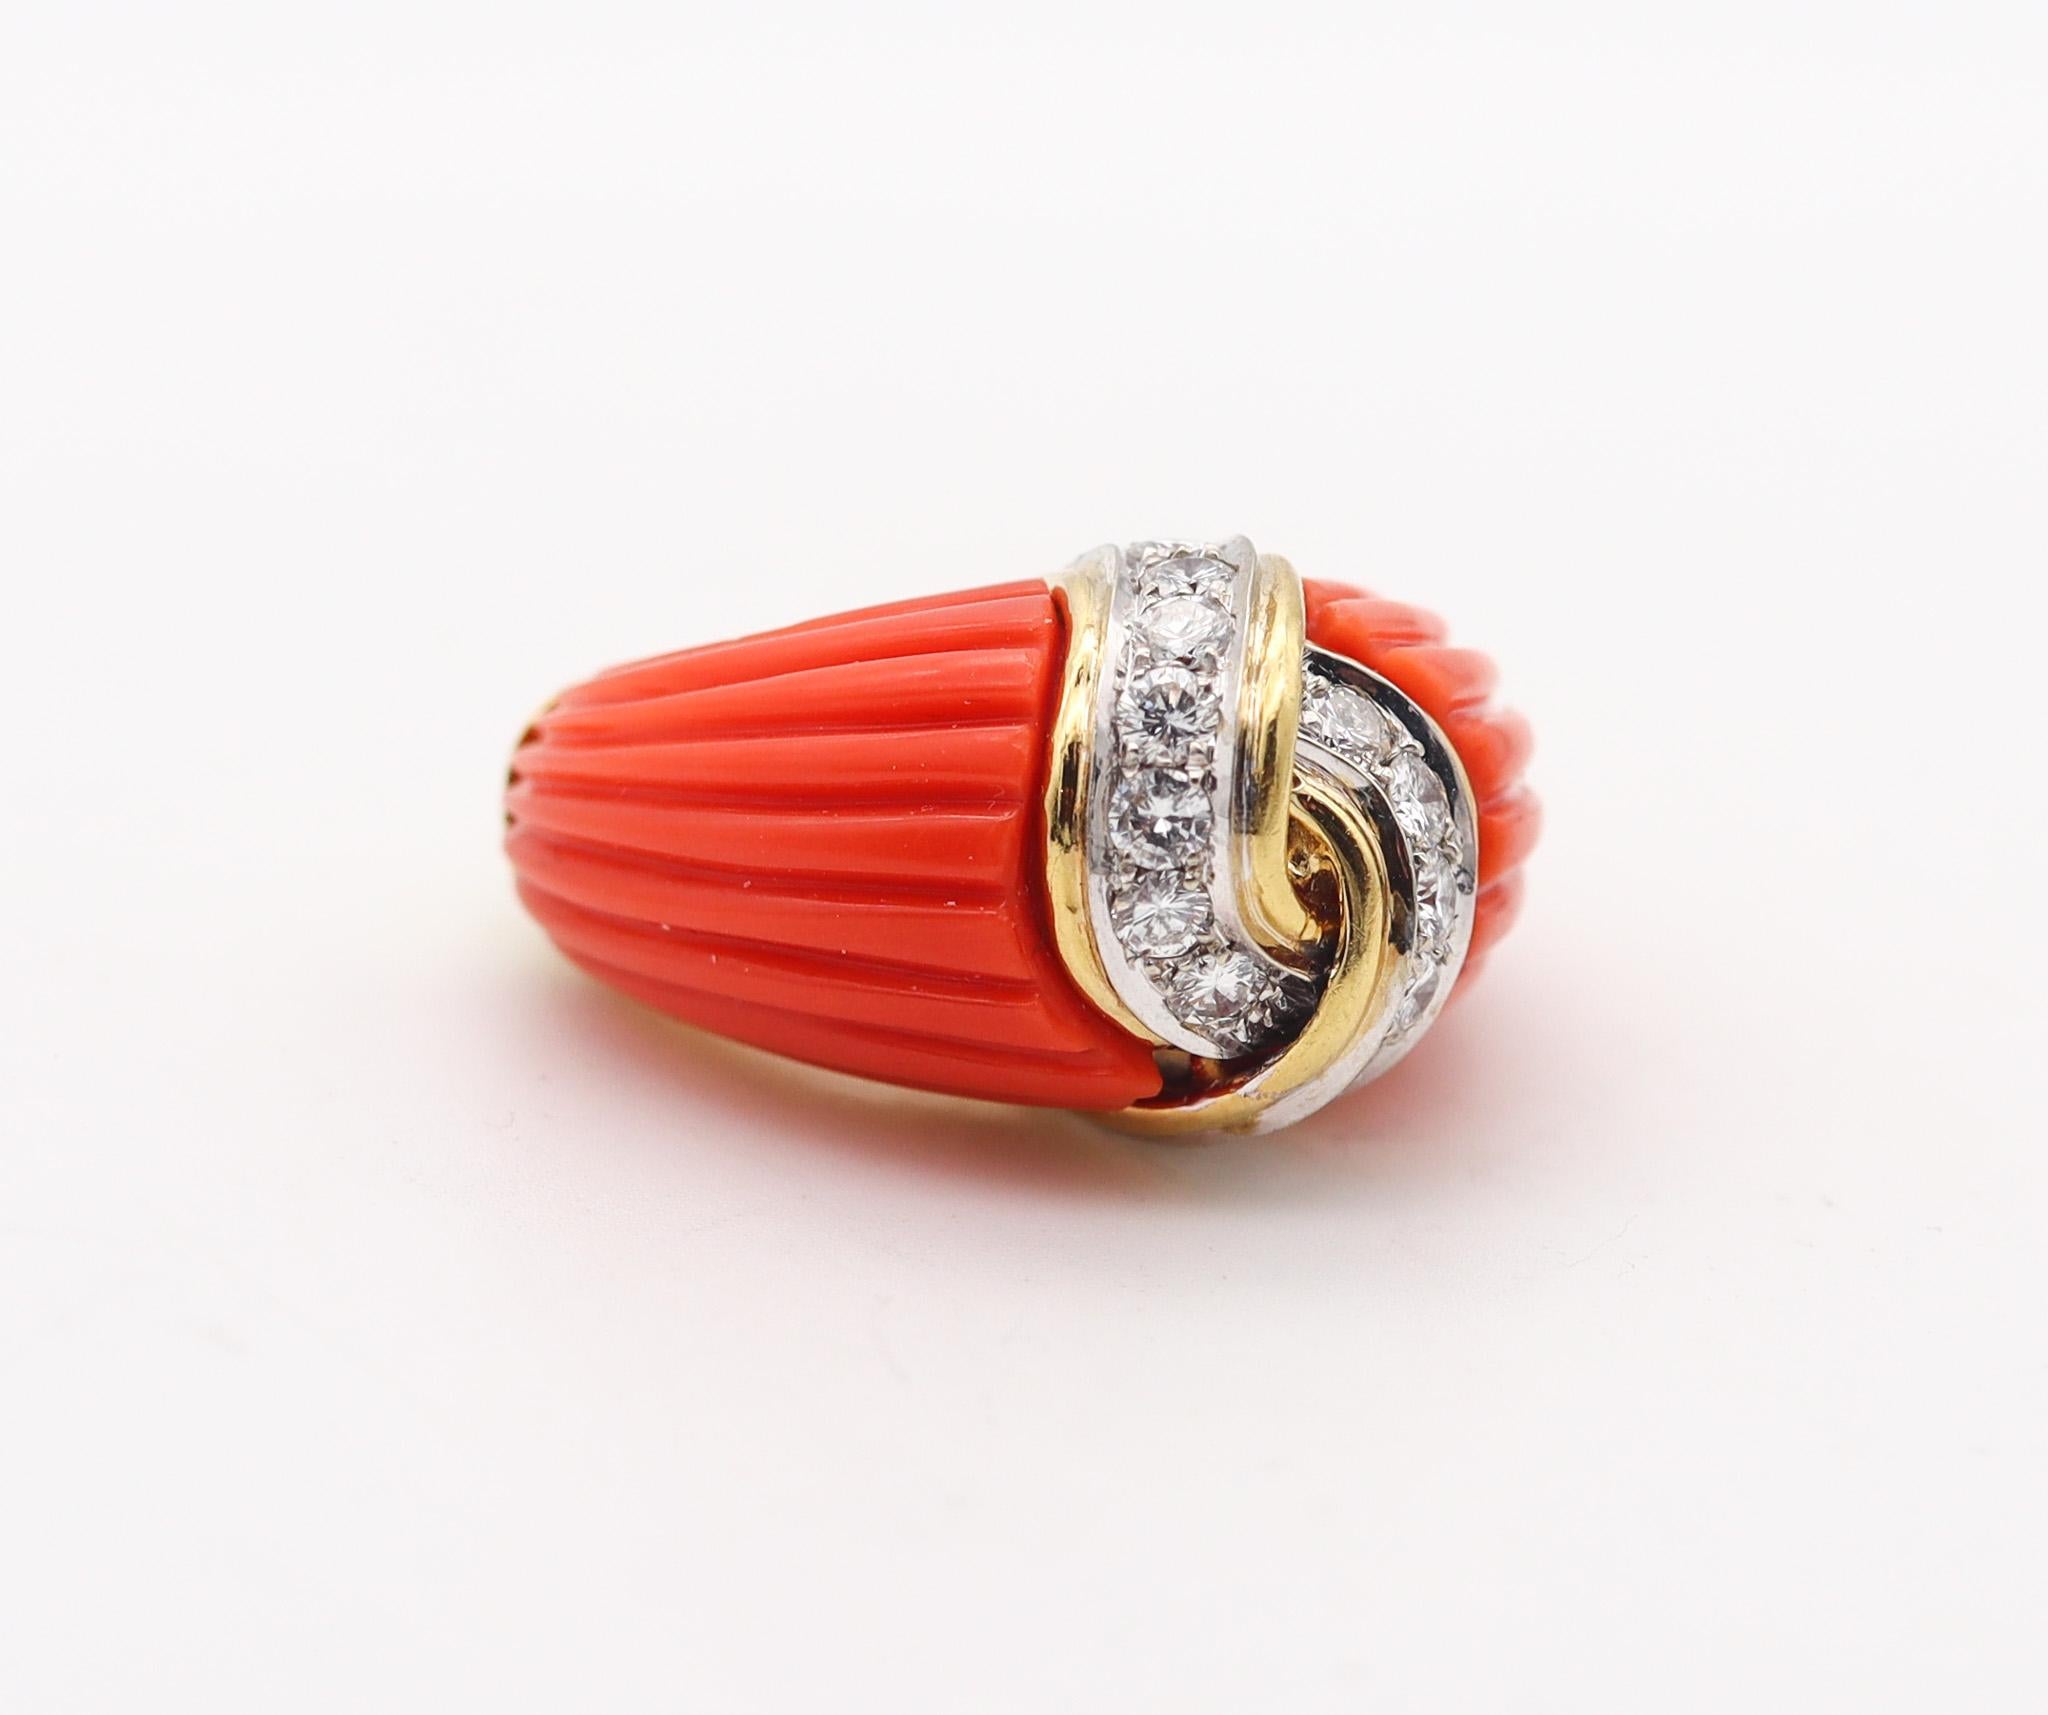 An Italian modernist cocktail ring.

Fabulous cocktail ring created in Italy back in the 1970's. This modernist ring has been crafted with a solid and bold construction in solid yellow gold of 18 karats with high polished finish. The ring is